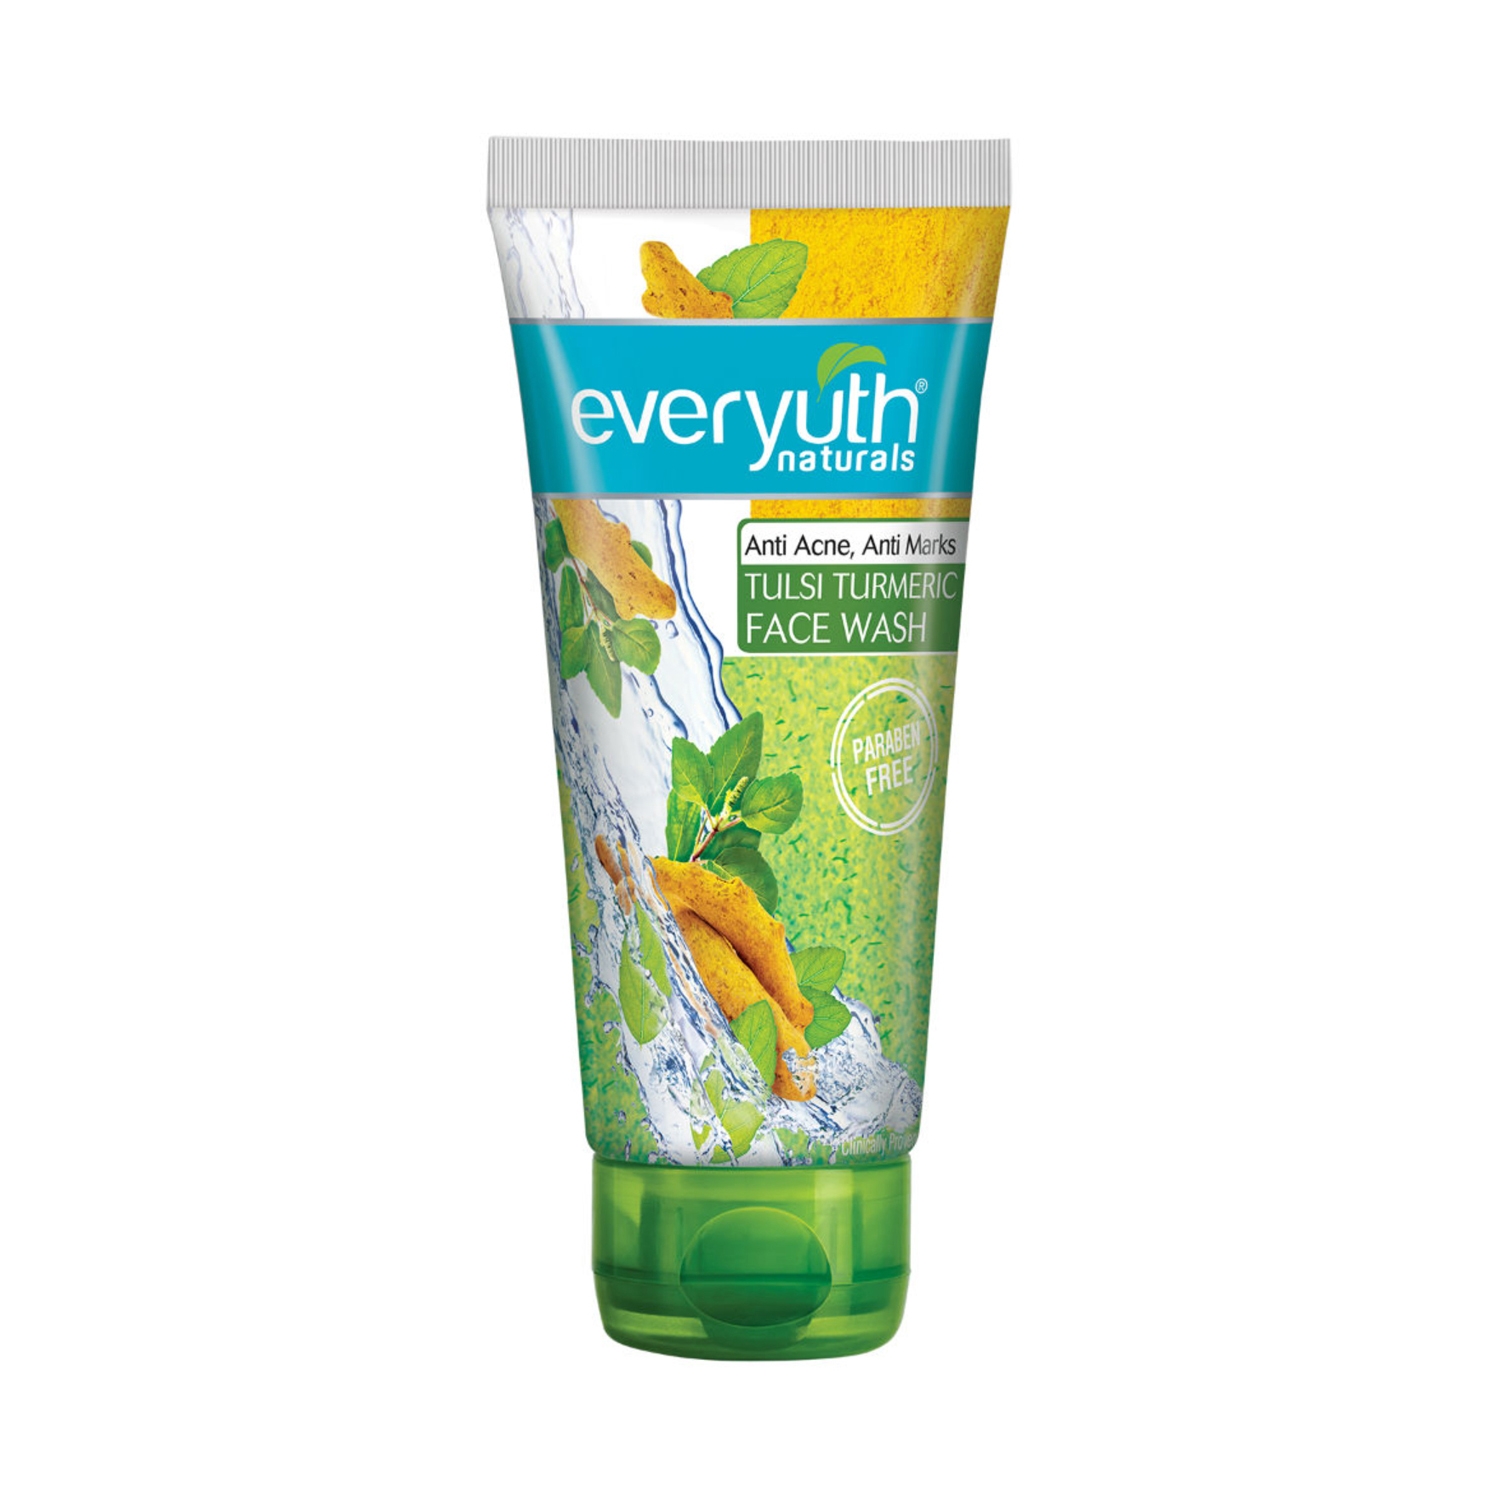 Everyuth Naturals | Everyuth Naturals Tulsi Turmeric Face Wash (150g)